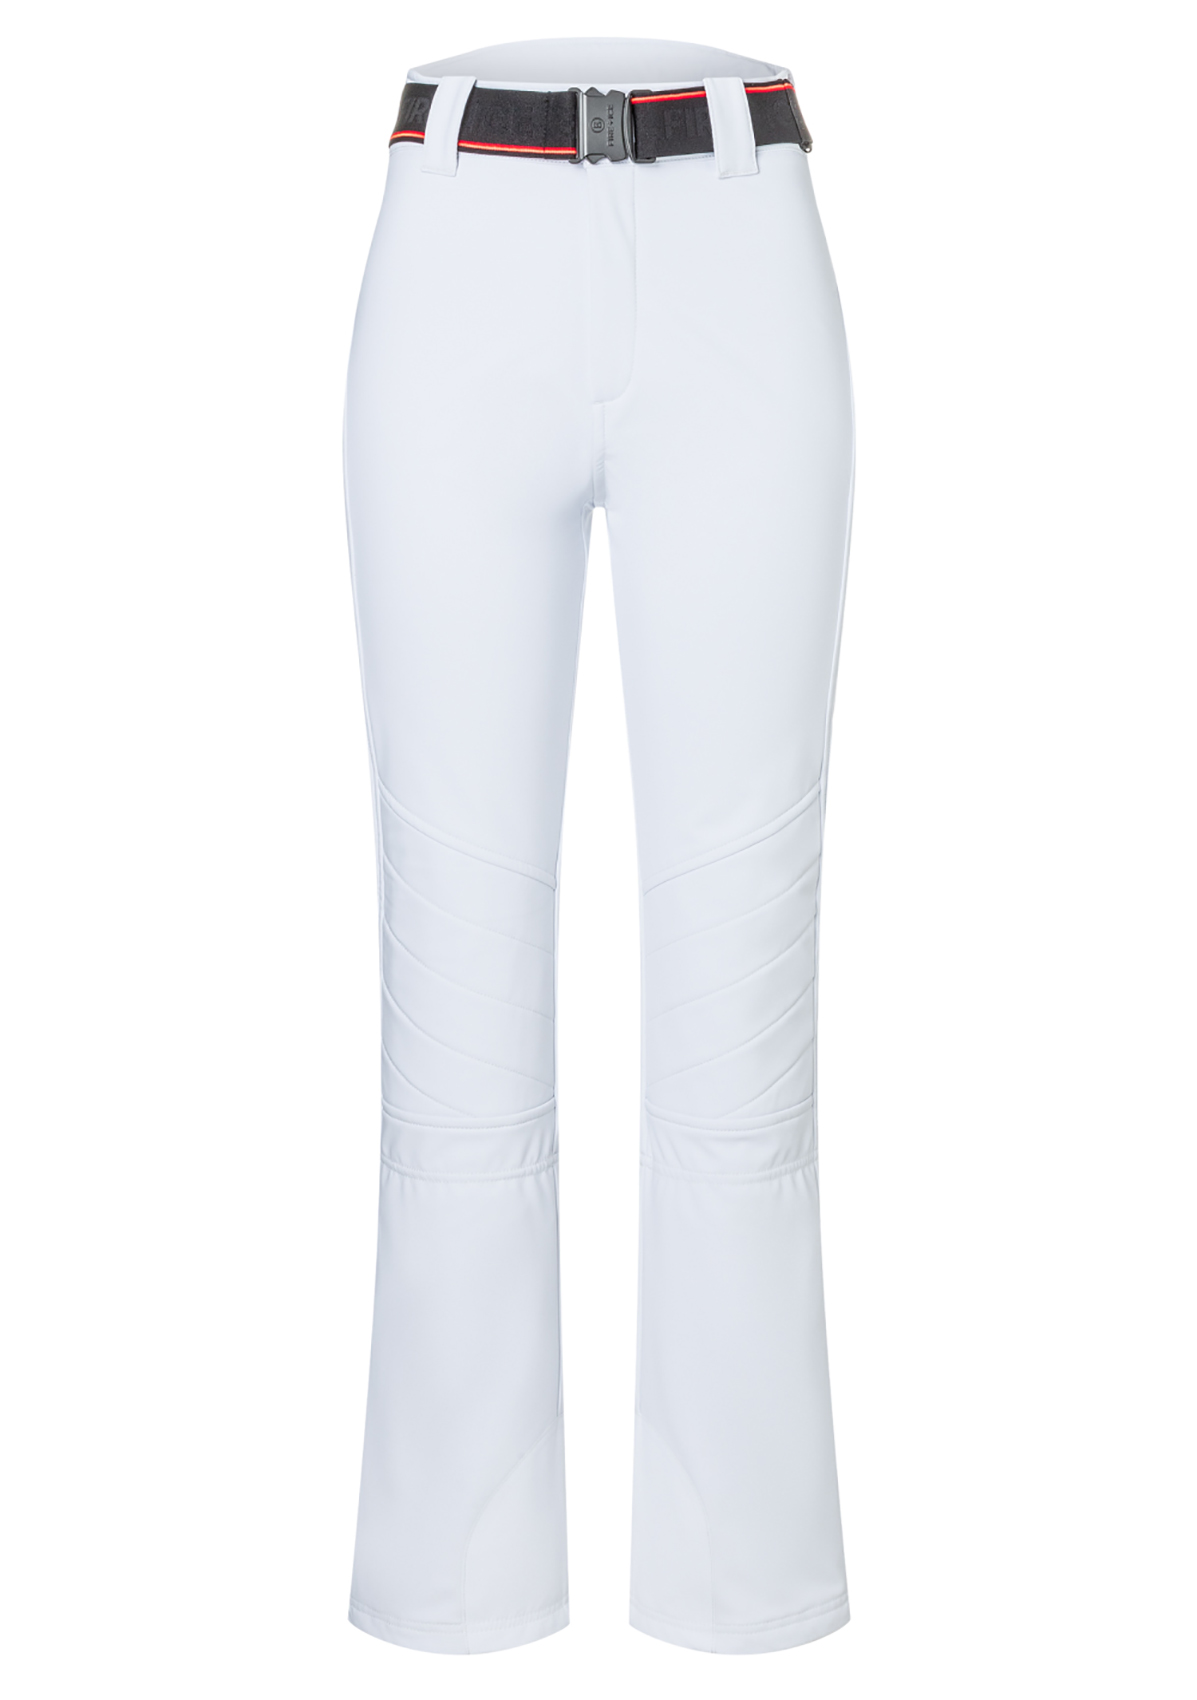 Ski-Trousers ZULA 732 white | S | Hot Selection | purchase online